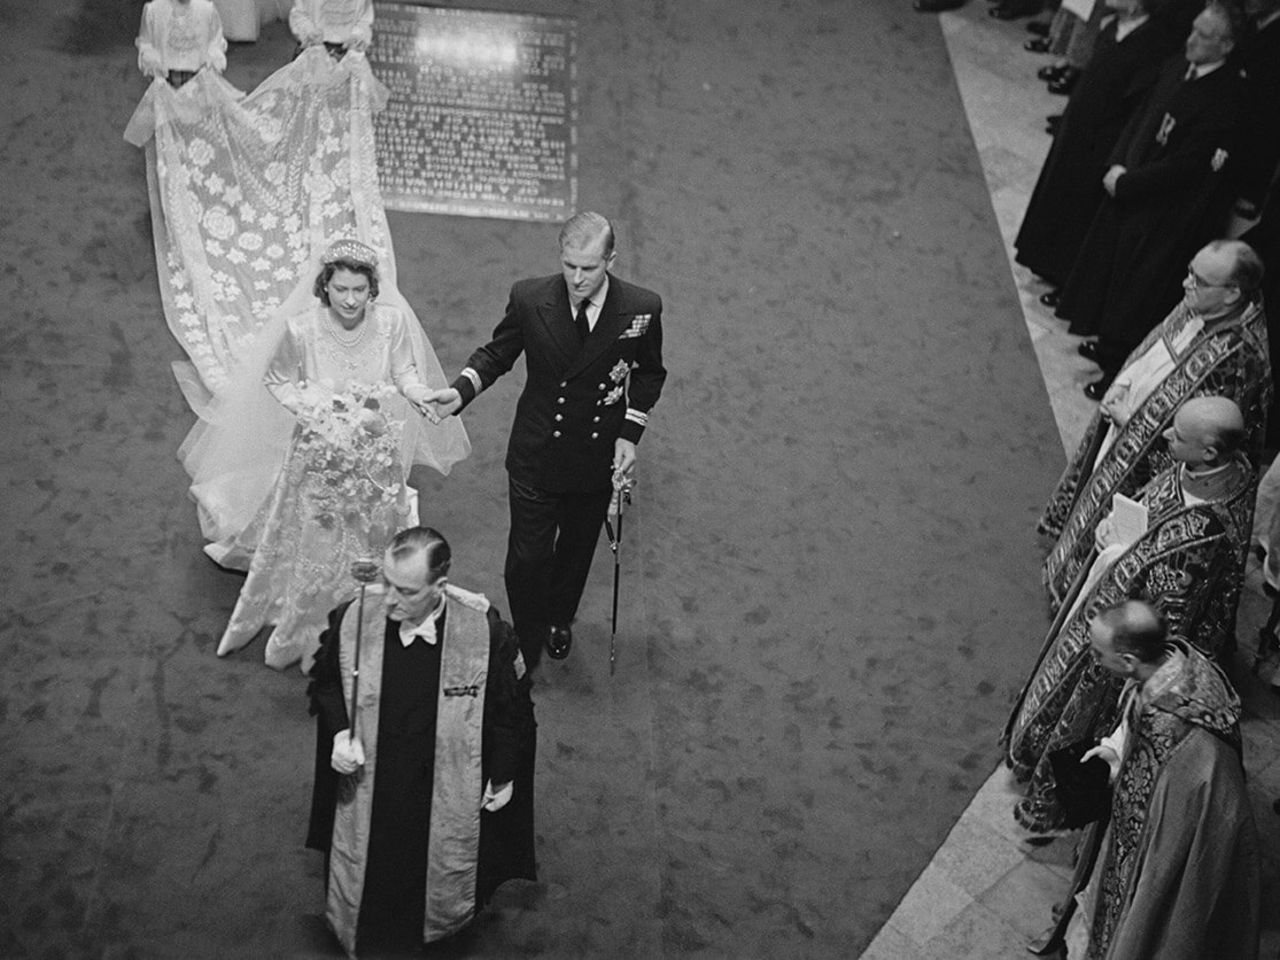 Elizabeth and Philip make their way down the aisle of Westminster Abbey on their wedding day, November 20, 1947.  